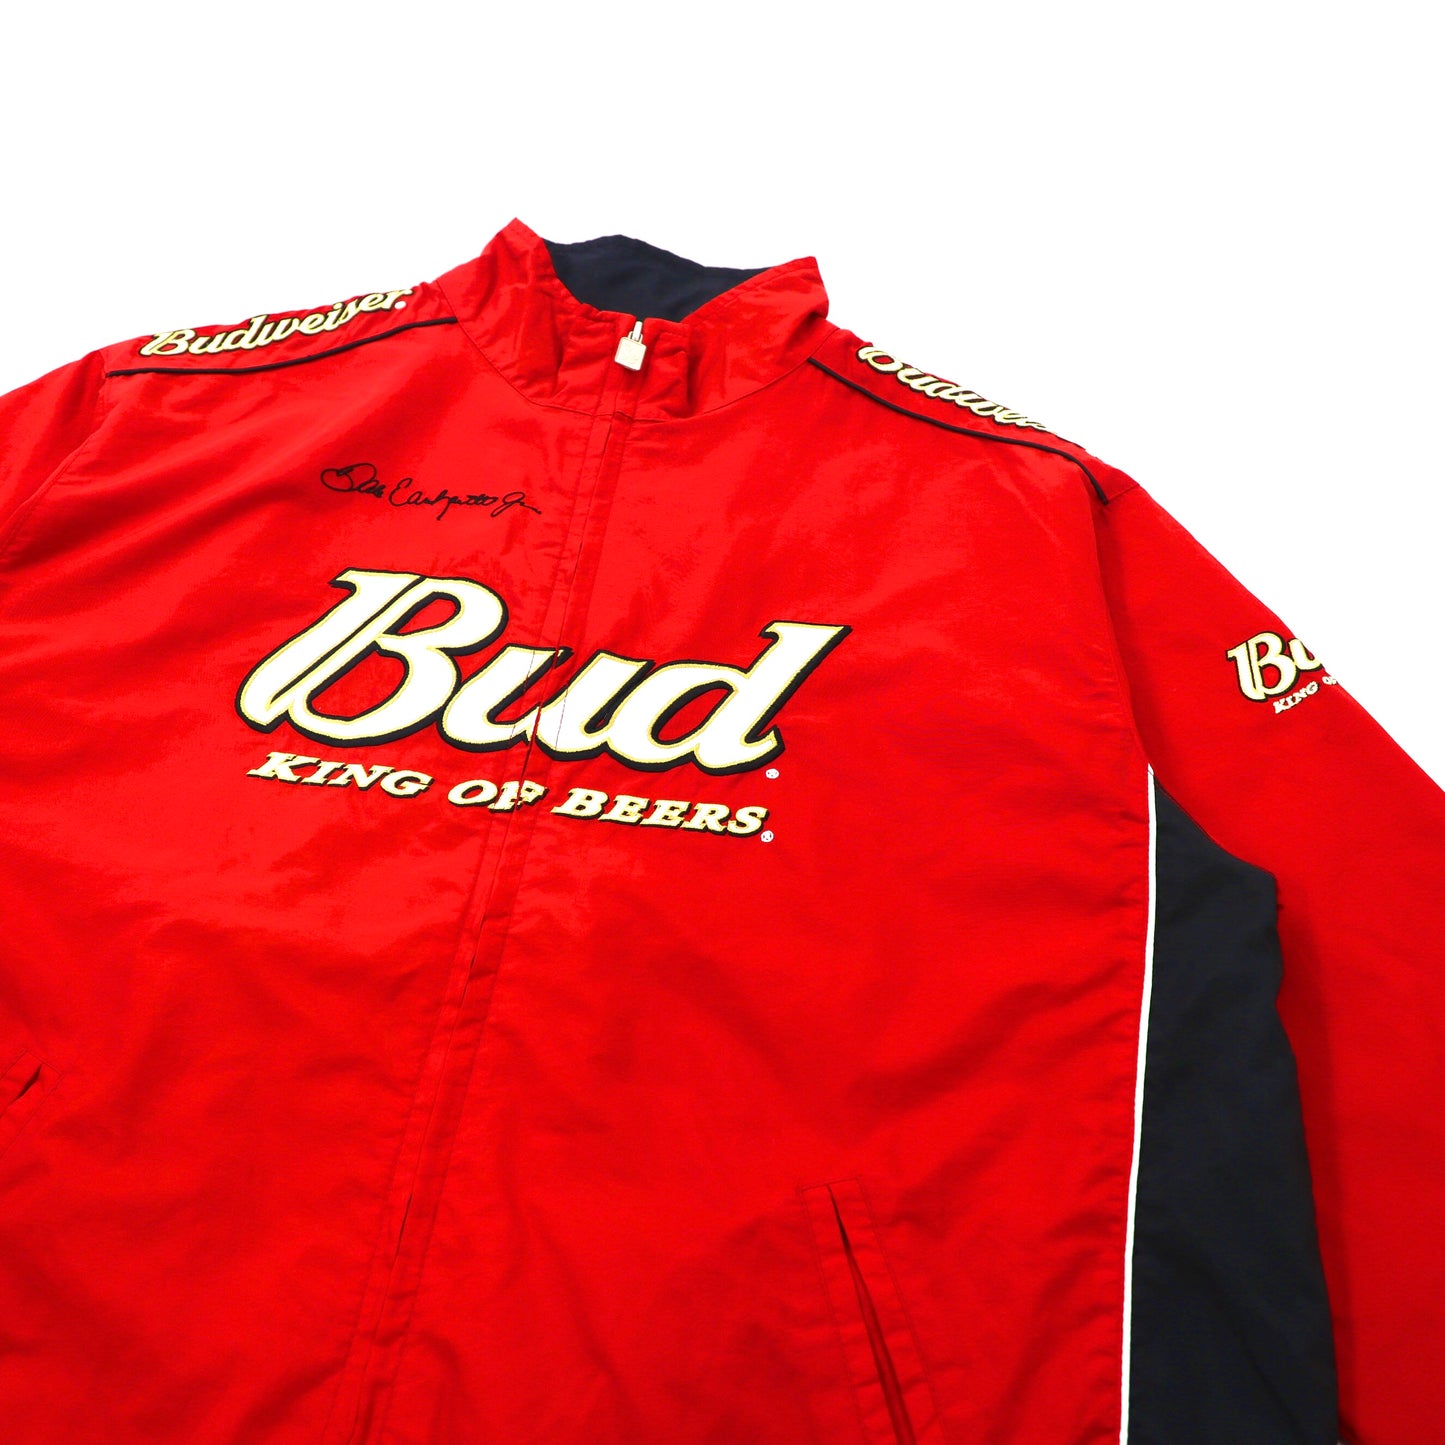 CHASE AUTHENTICS Racing Jacket M Red Nylon Budweiser Embroidery